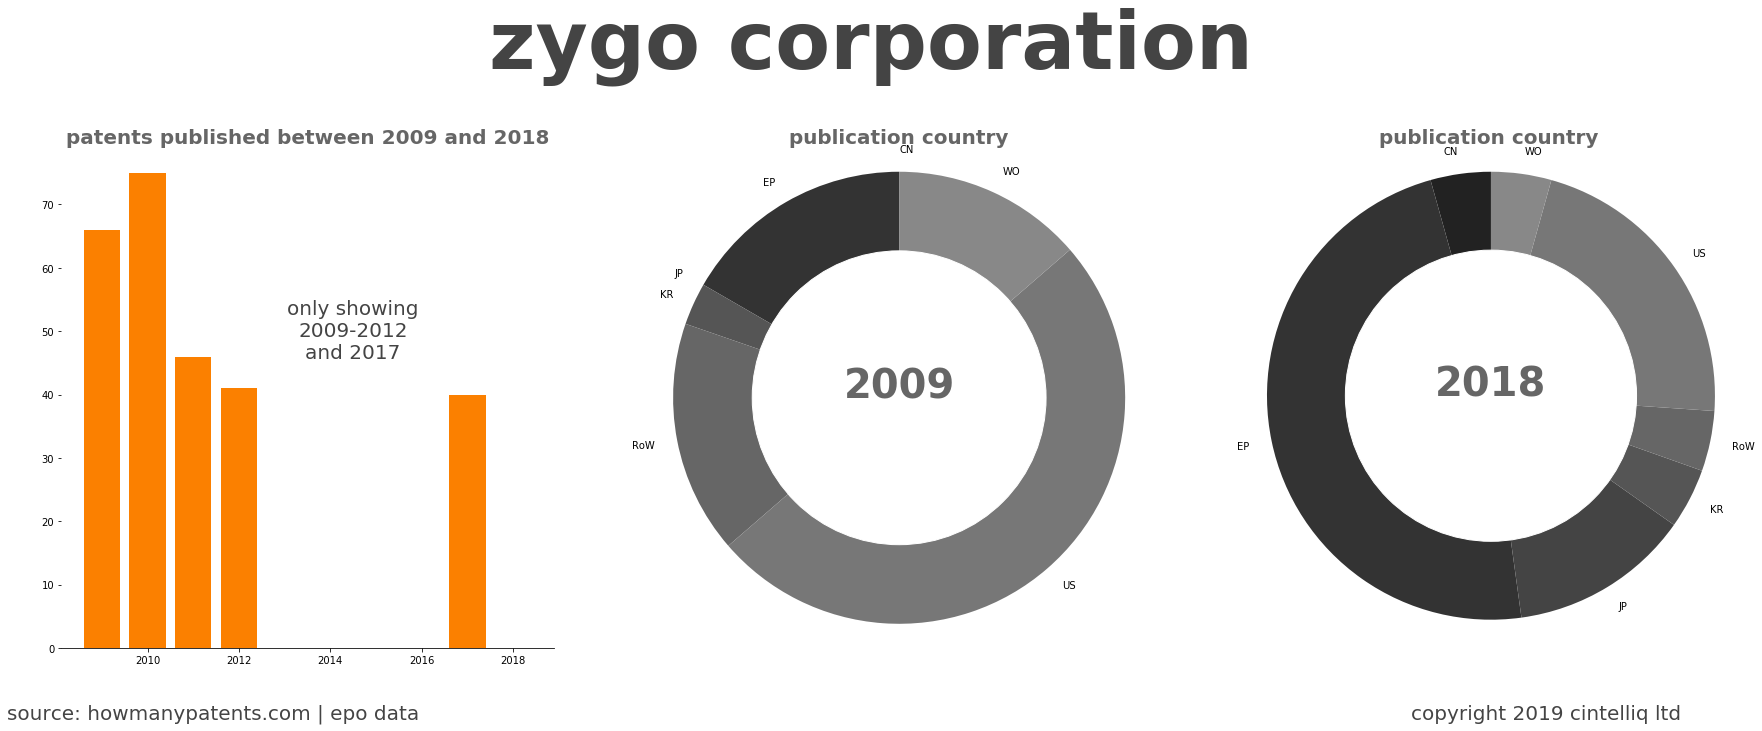 summary of patents for Zygo Corporation